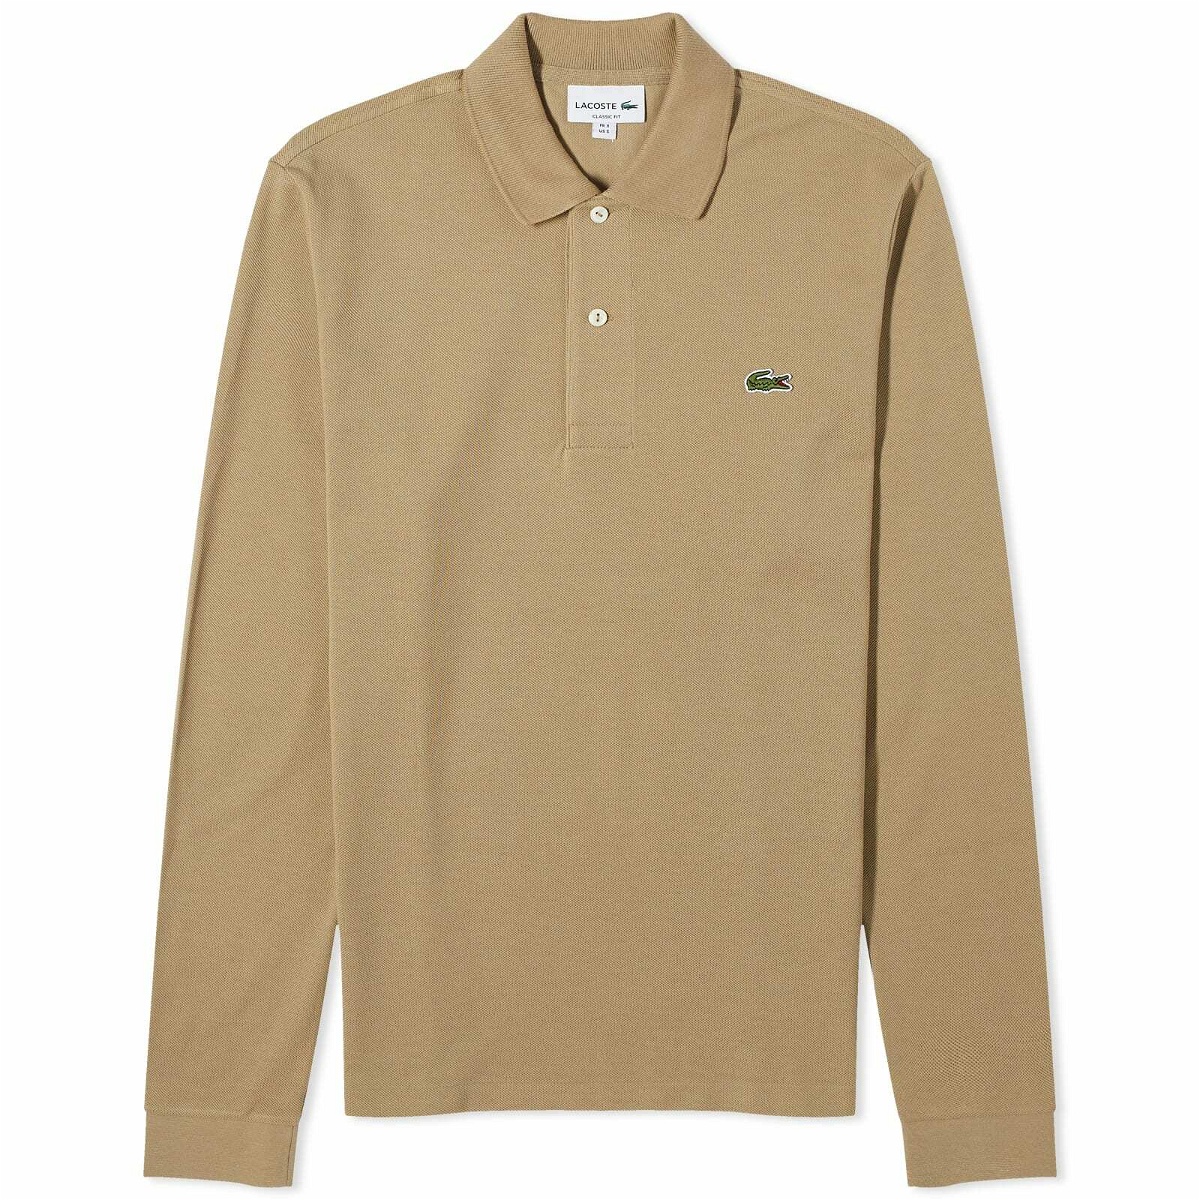 Lacoste Men's Long Sleeve Classic Polo Shirt in Lion Lacoste